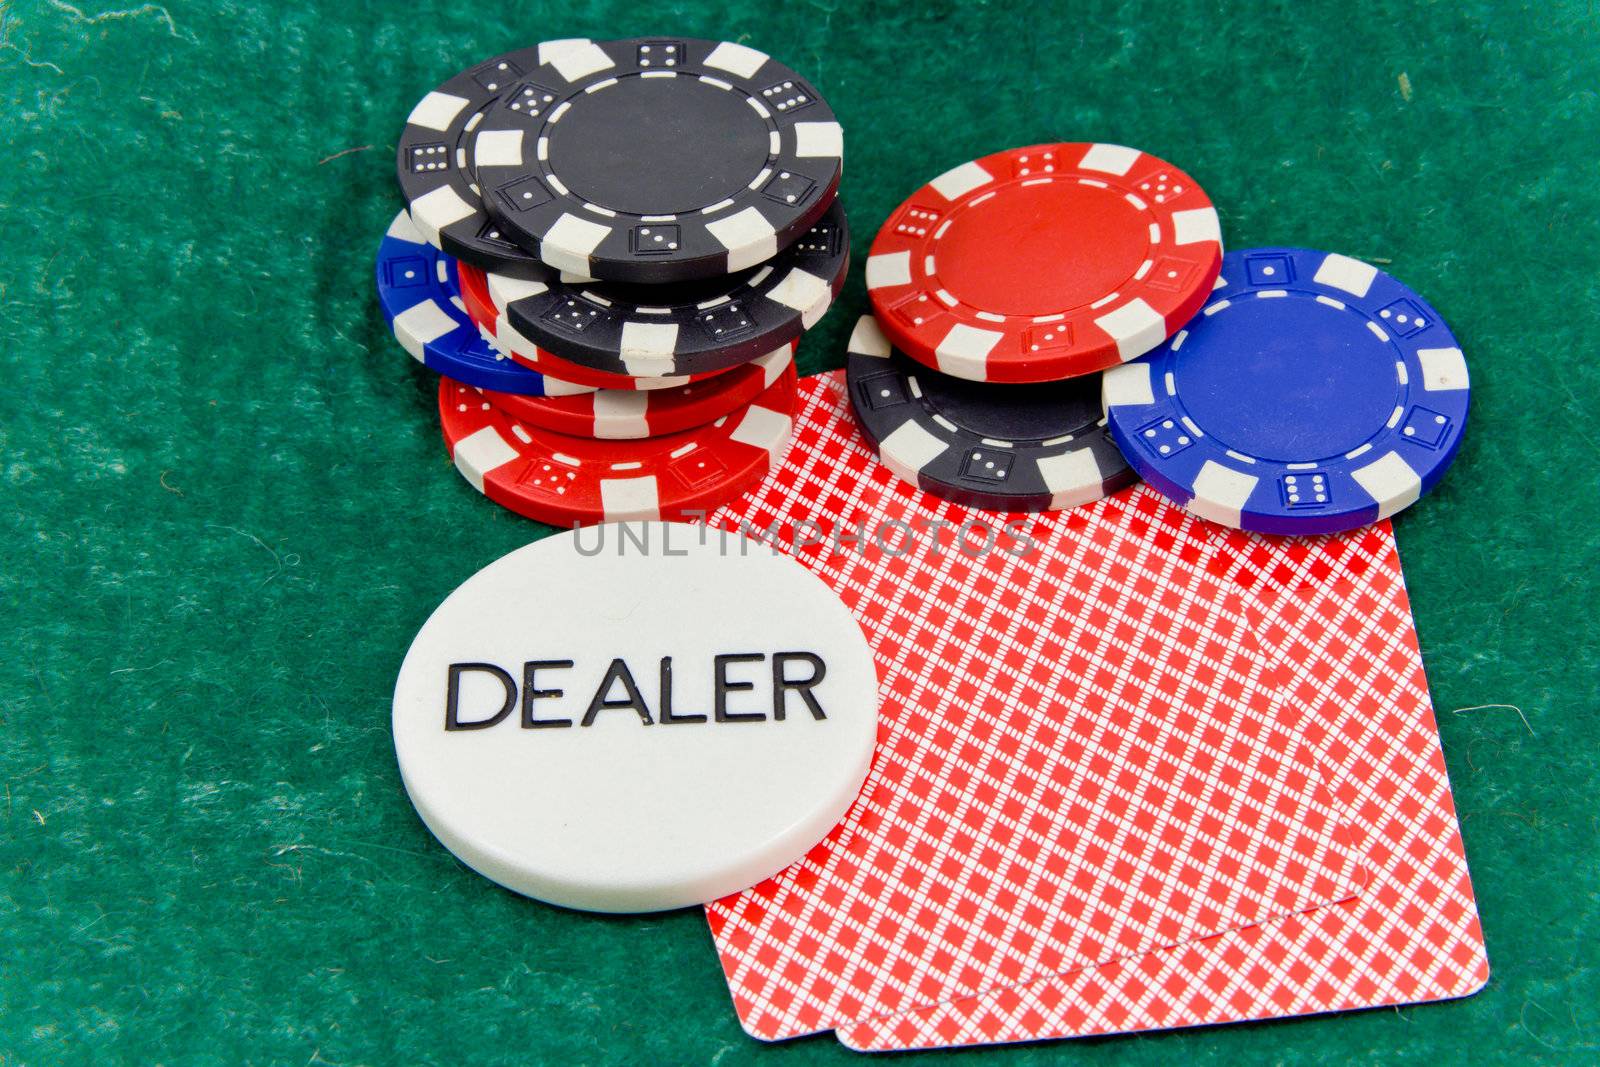 Poker dealer button, chips and cards on green felt by huntz